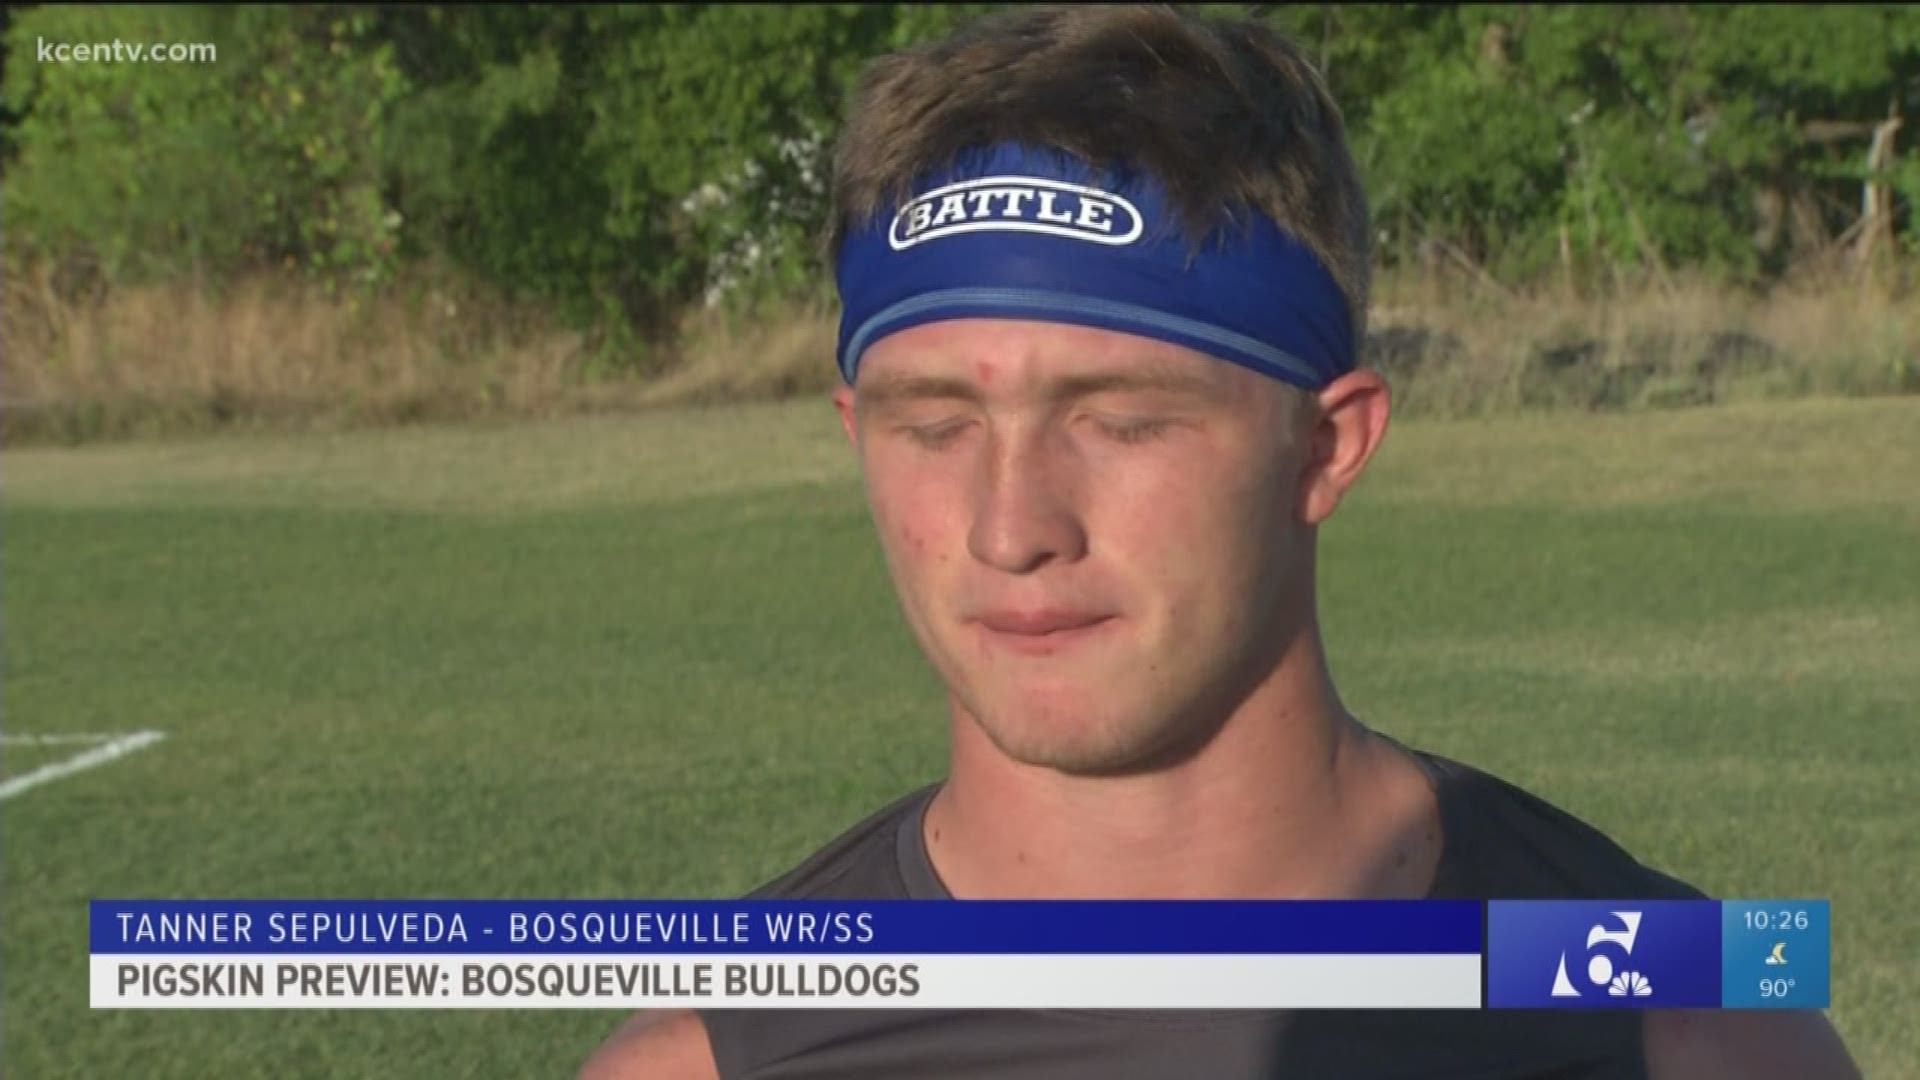 Bosqueville will travel to face Mart on Aug. 31.